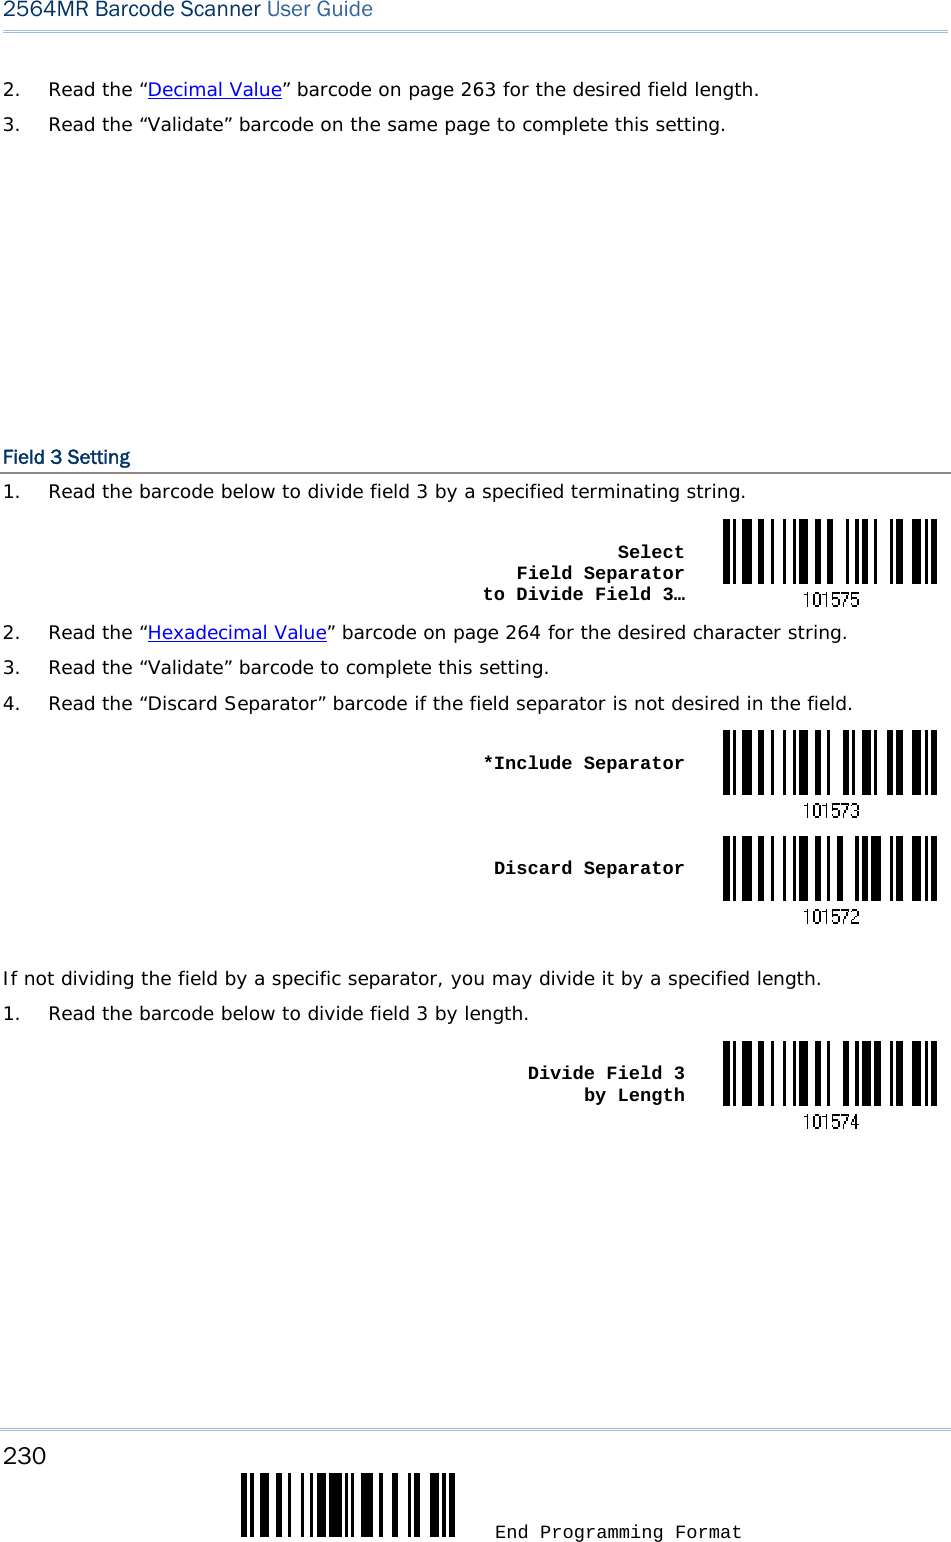 230  End Programming Format 2564MR Barcode Scanner User Guide  2.  Read the “Decimal Value” barcode on page 263 for the desired field length. 3.  Read the “Validate” barcode on the same page to complete this setting.         Field 3 Setting 1.  Read the barcode below to divide field 3 by a specified terminating string.  Select  Field Separator  to Divide Field 3…2.  Read the “Hexadecimal Value” barcode on page 264 for the desired character string. 3.  Read the “Validate” barcode to complete this setting. 4.  Read the “Discard Separator” barcode if the field separator is not desired in the field.  *Include Separator Discard Separator If not dividing the field by a specific separator, you may divide it by a specified length. 1.  Read the barcode below to divide field 3 by length.  Divide Field 3  by Length